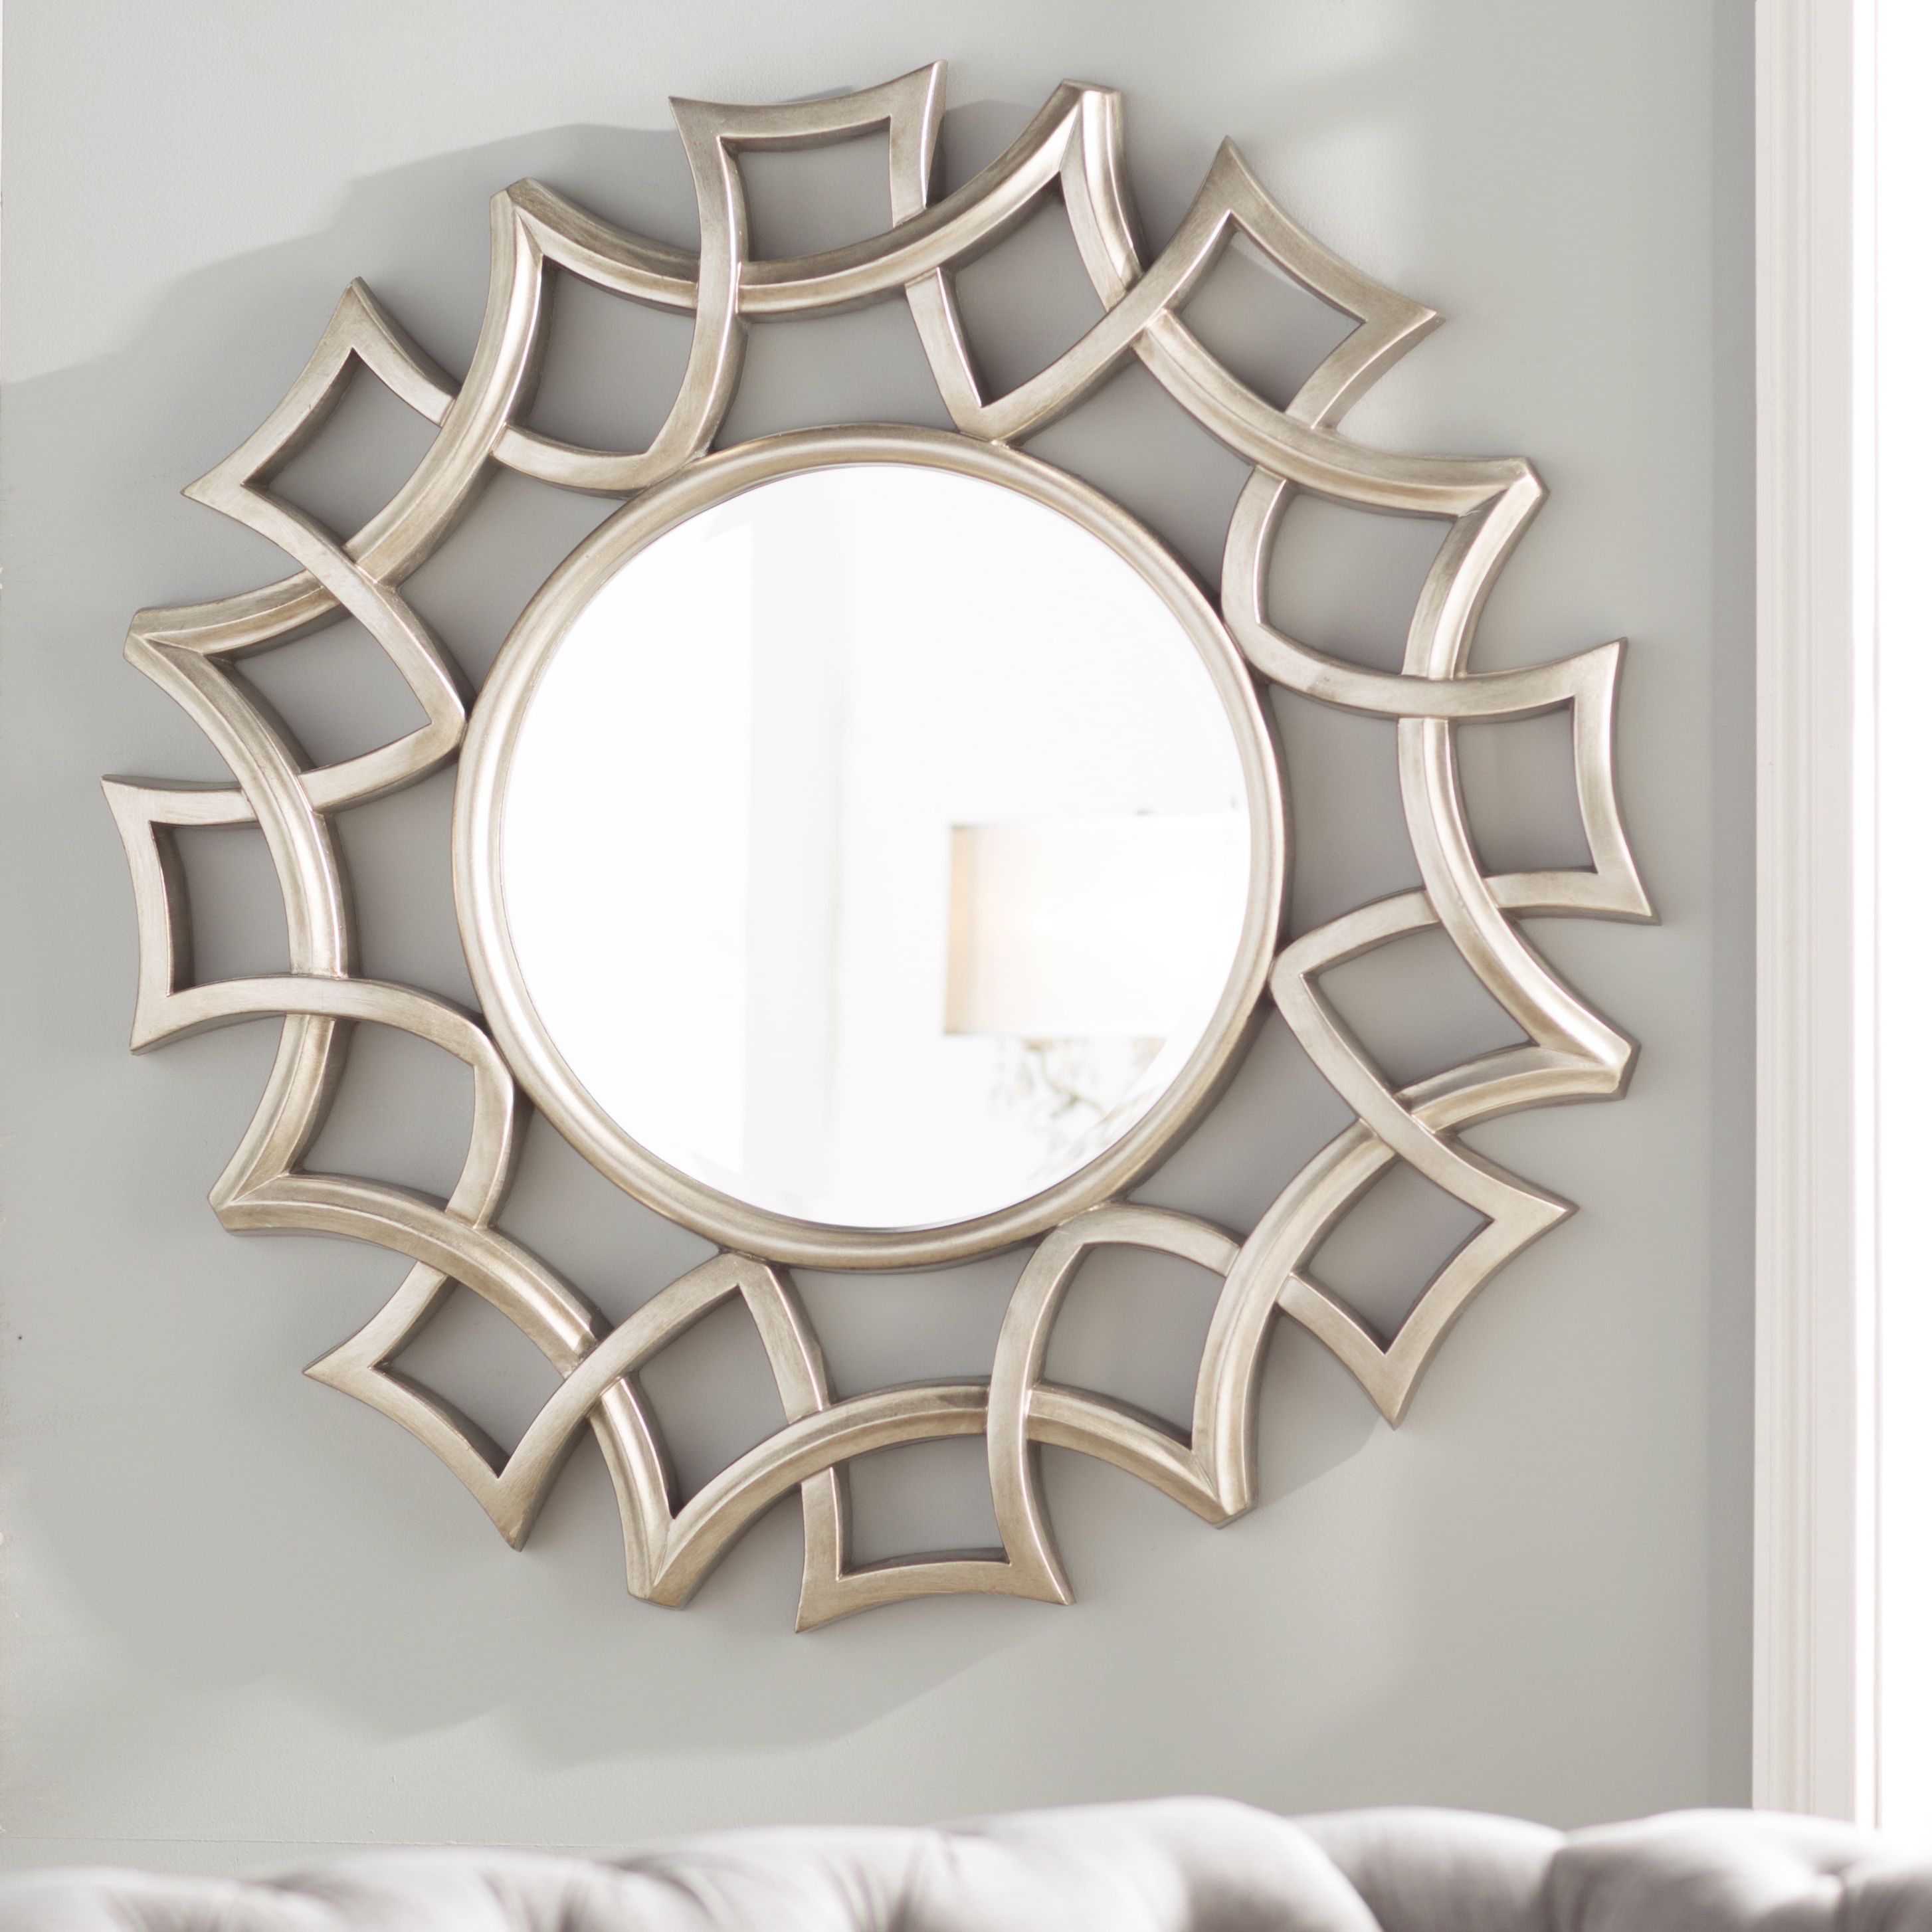 Well Known Starburst Wall Decor By Willa Arlo Interiors With Regard To Willa Arlo Interiors Brylee Traditional Sunburst Mirror & Reviews (View 1 of 20)